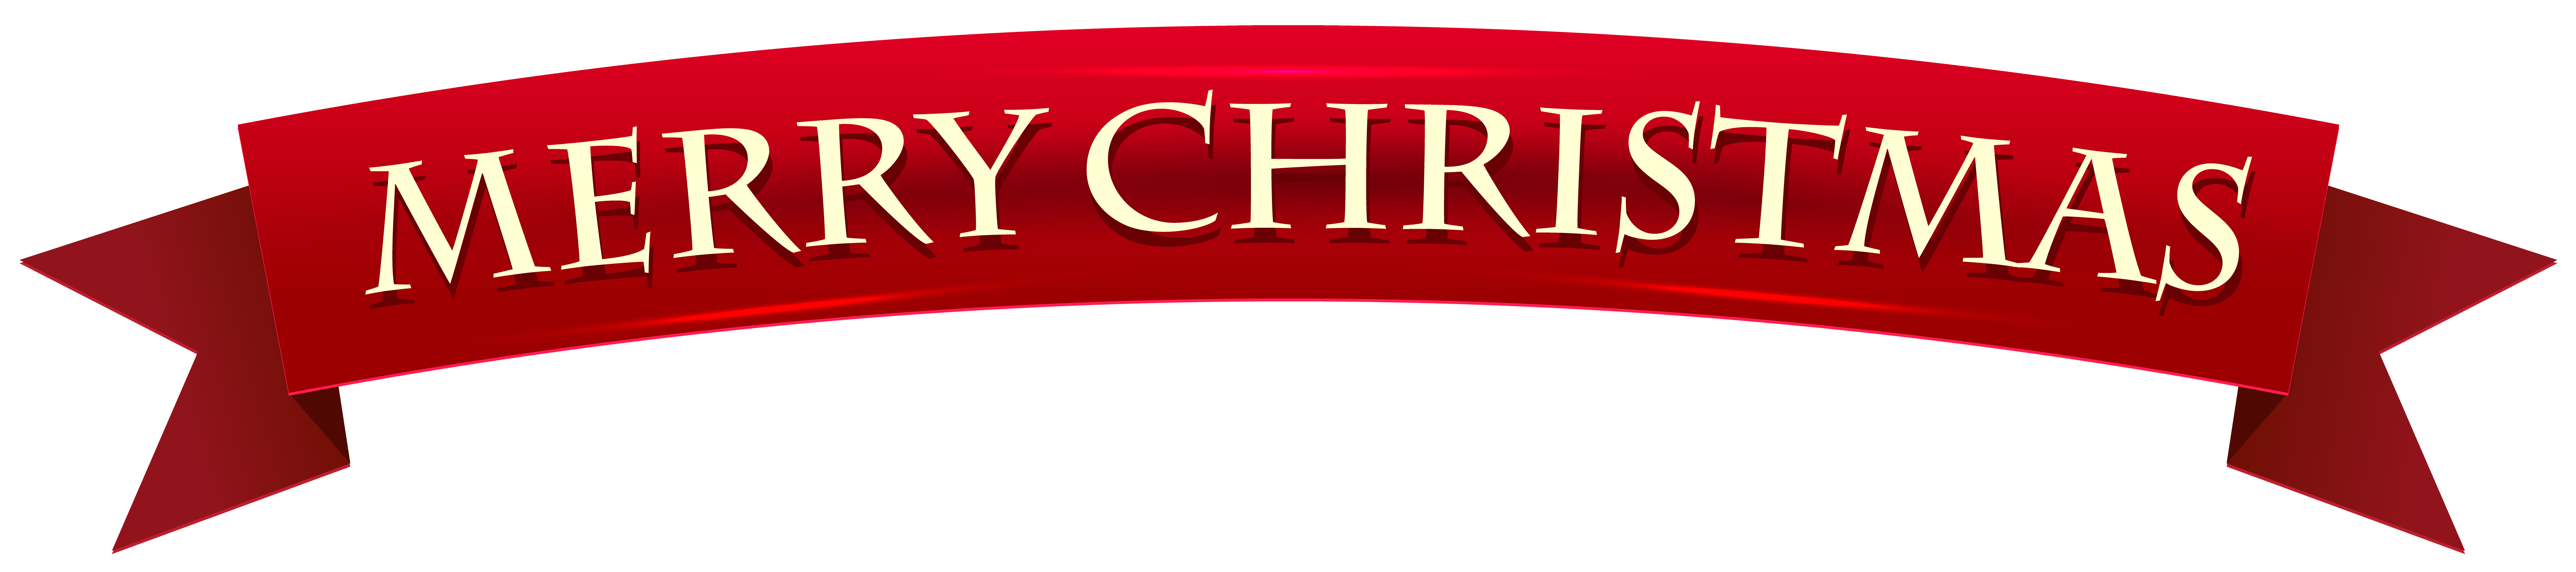 Banner Merry Christmas Transparent Clip Art Image | Gallery ...